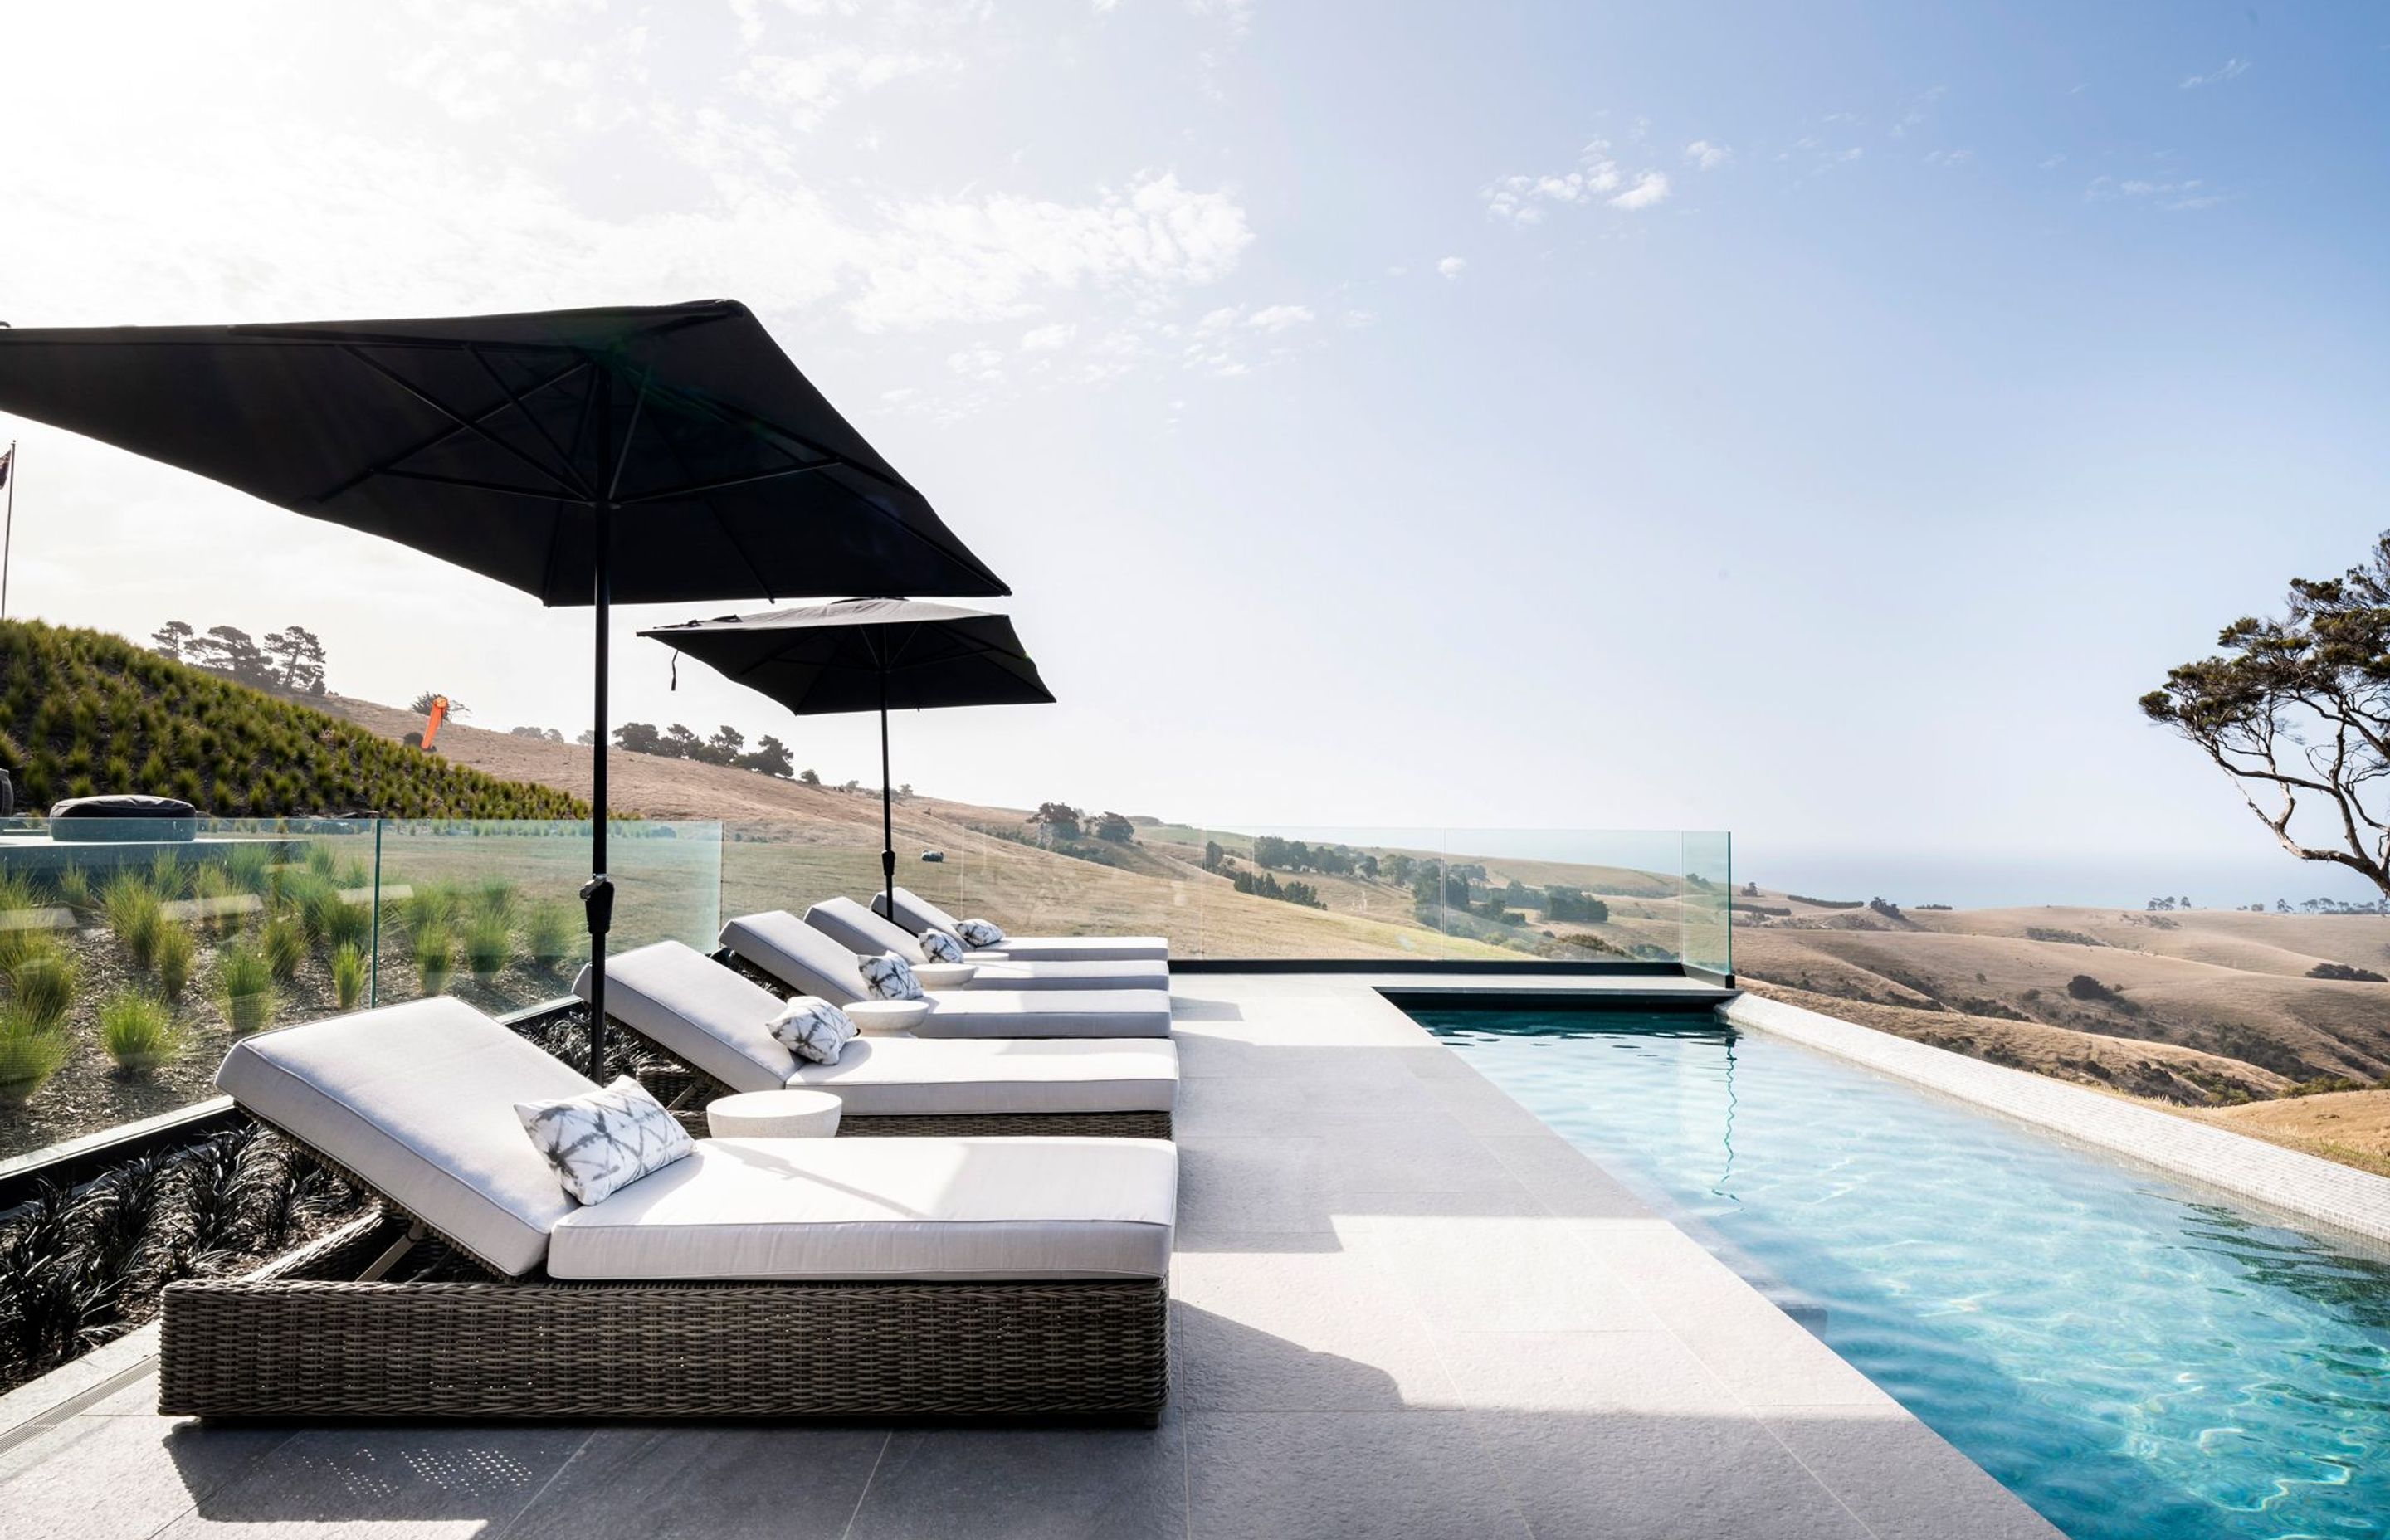 The pool cabana adds a "Hollywood" vibe to the property, says David Hill.